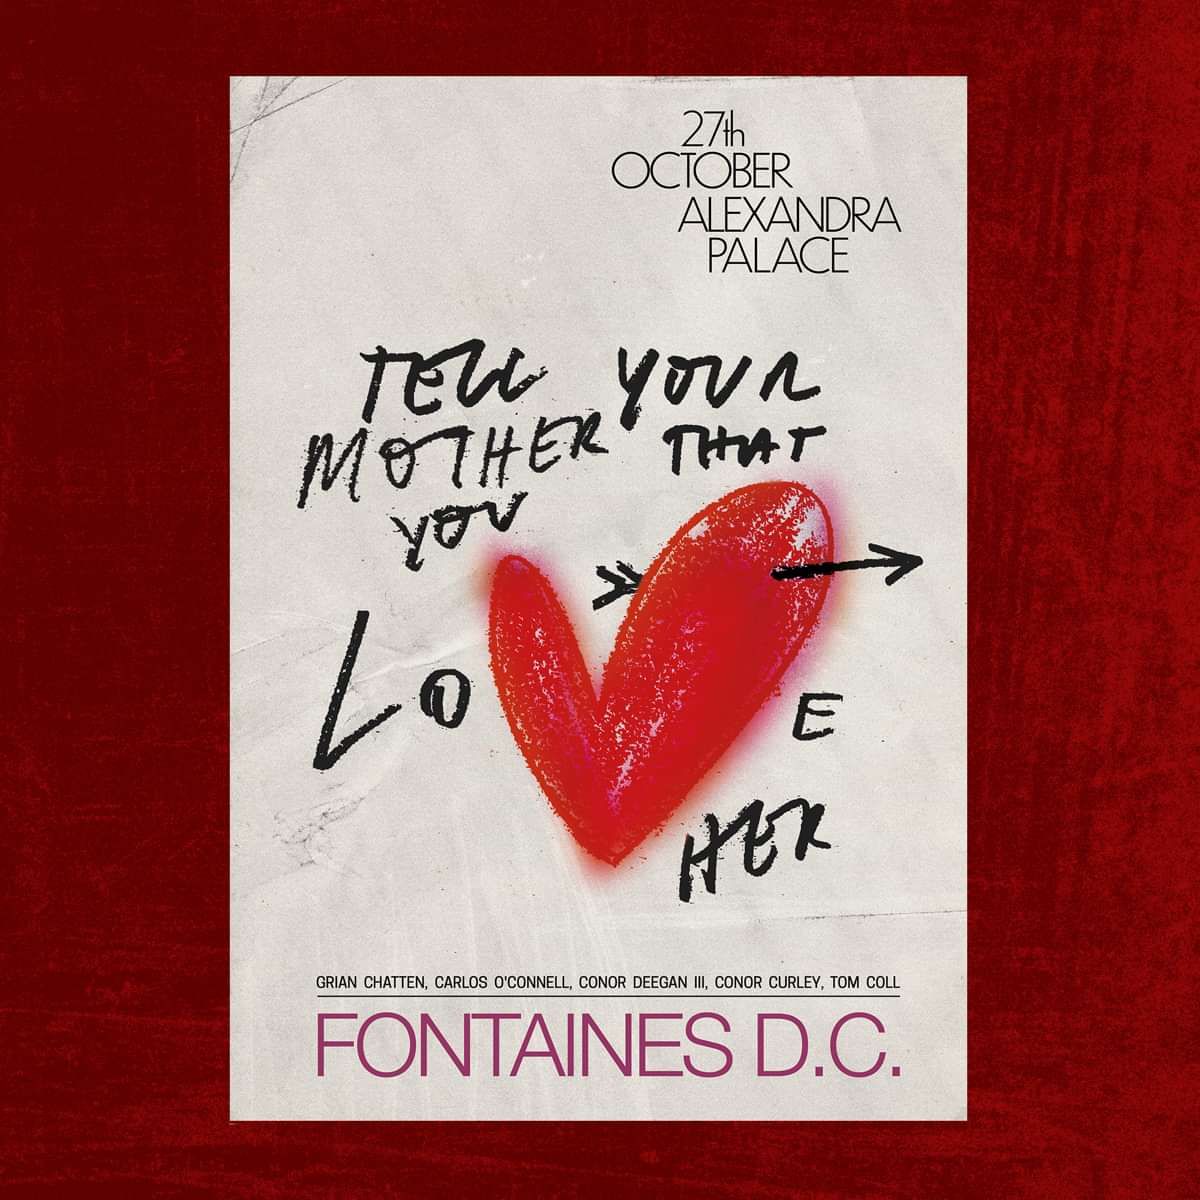 'Tell your mother that you love her': Fontains D.C. gig poster.